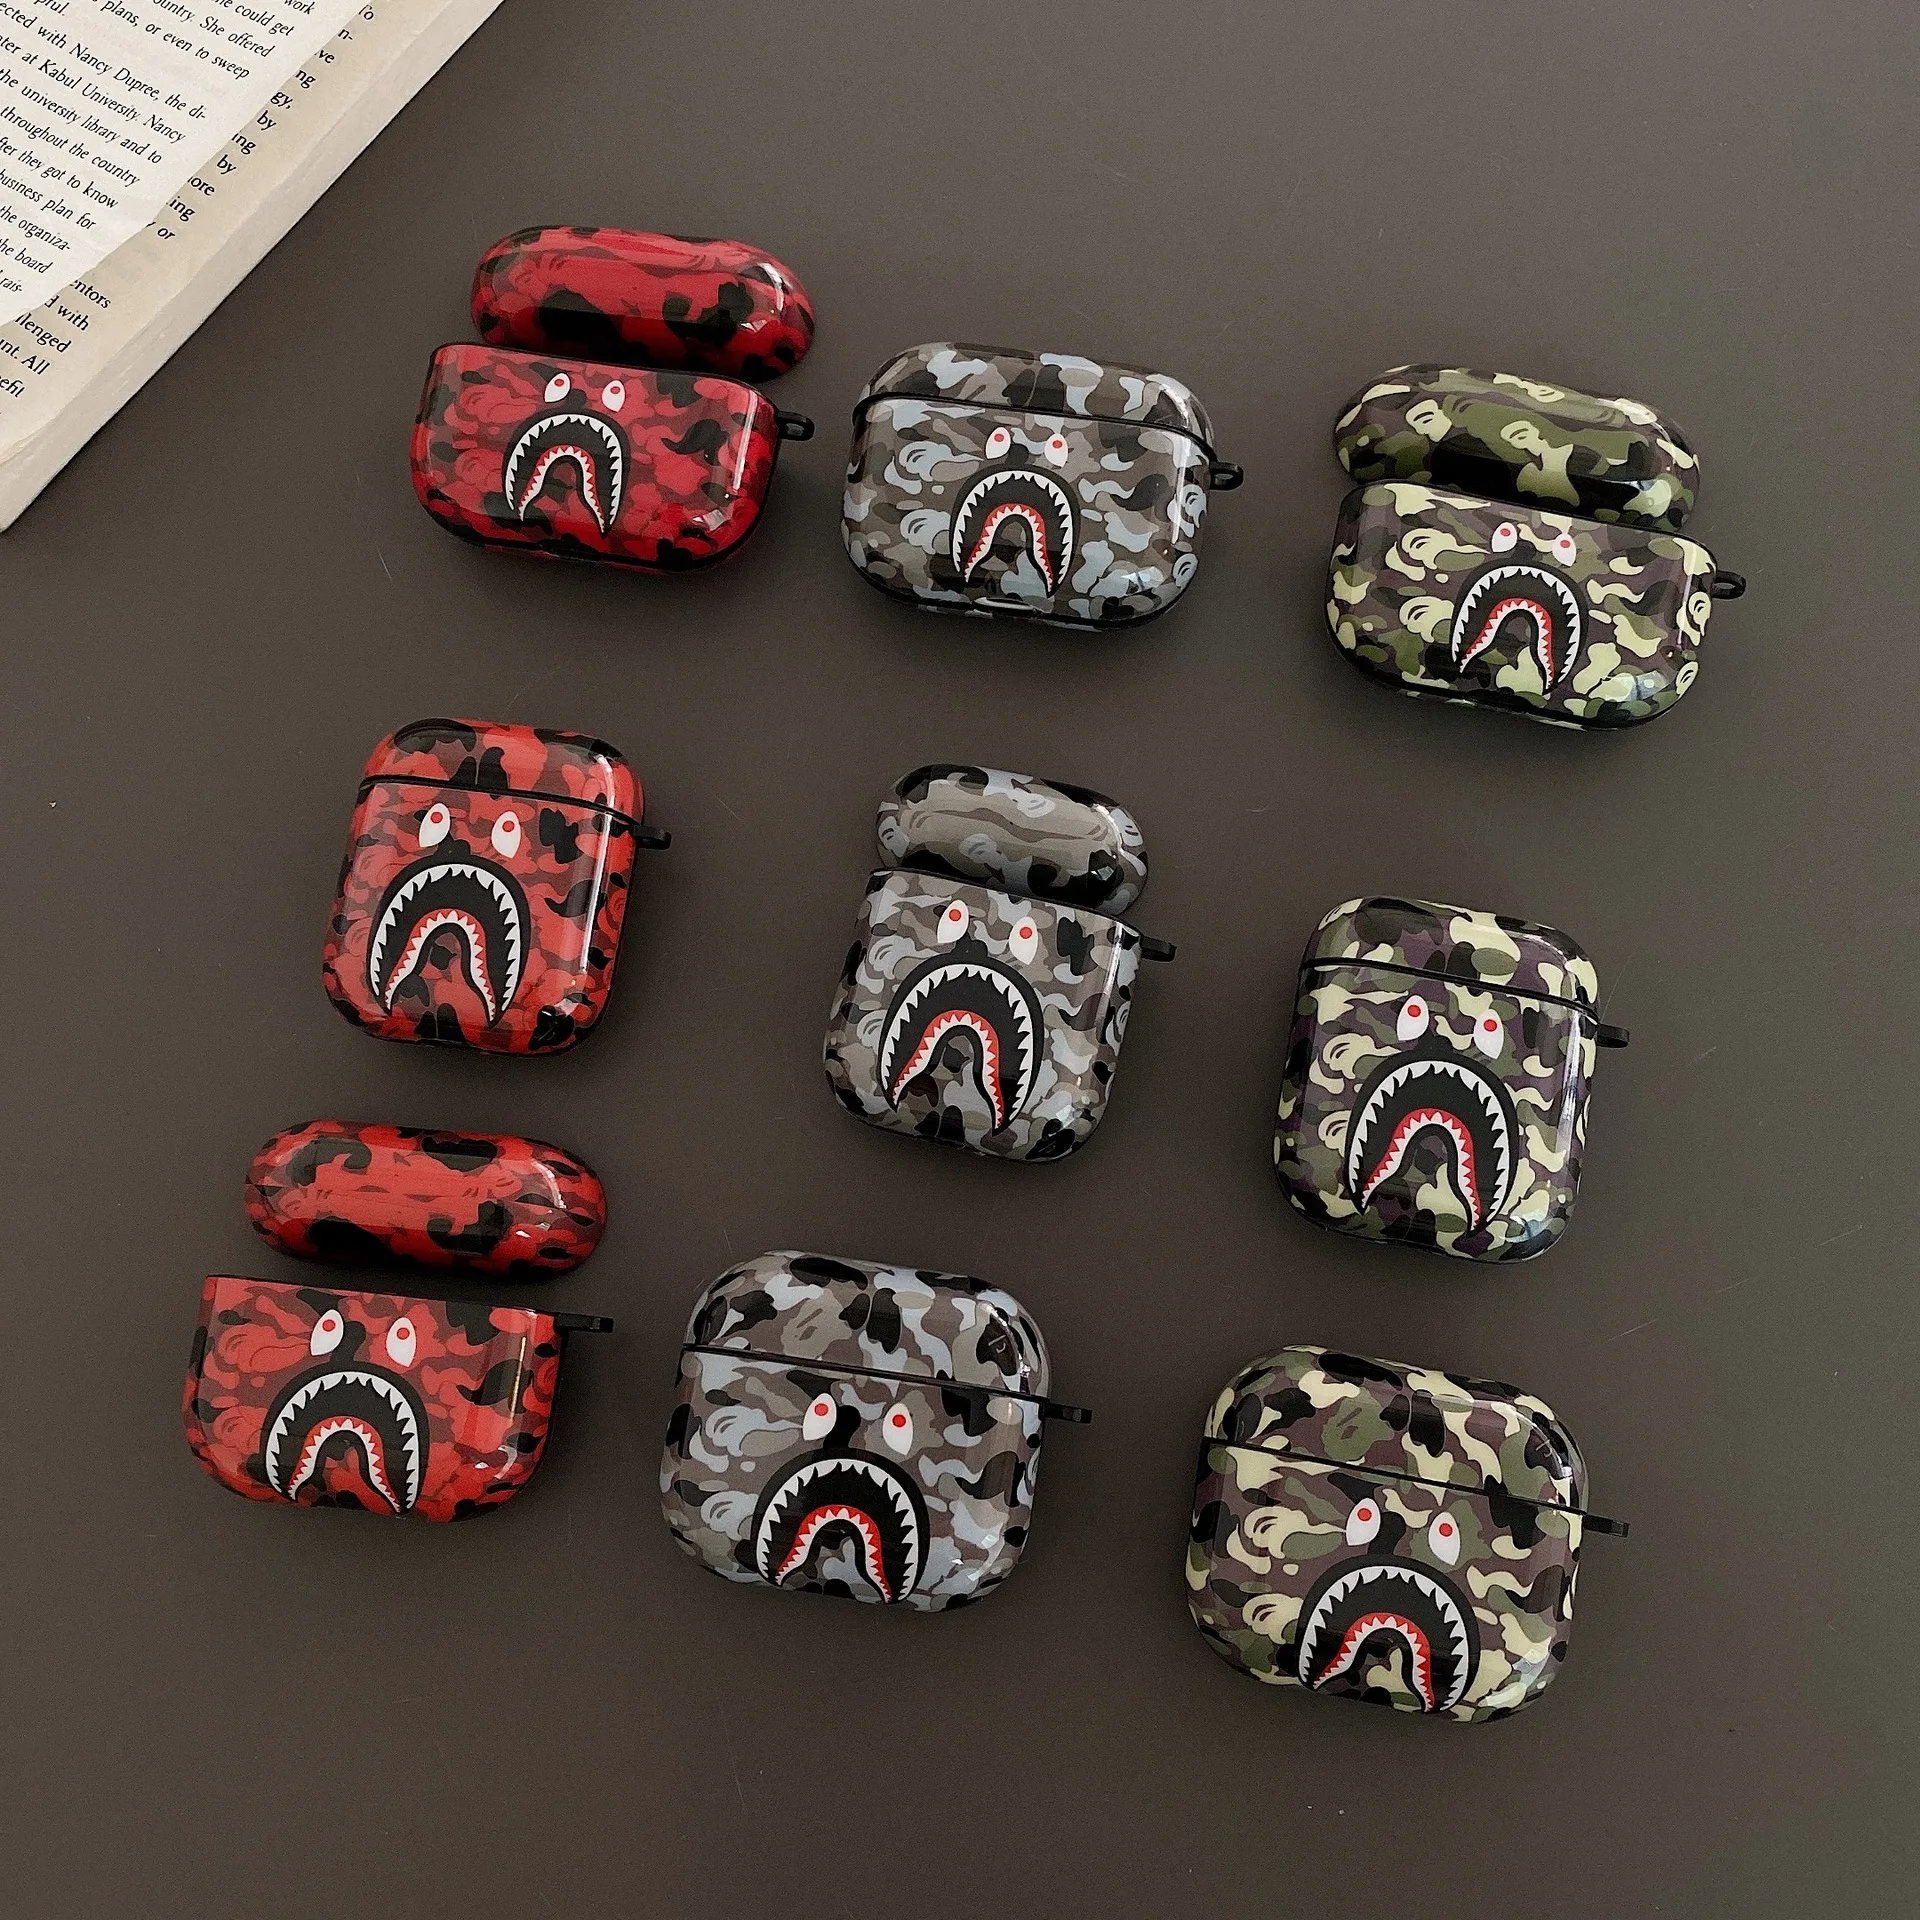 

A Bathing Ape Camo Shark BAPE For Apple AirPods 3 Pro 2 1 Case Cover Earphone Air pods Protective Shell Fashion Cool 2022